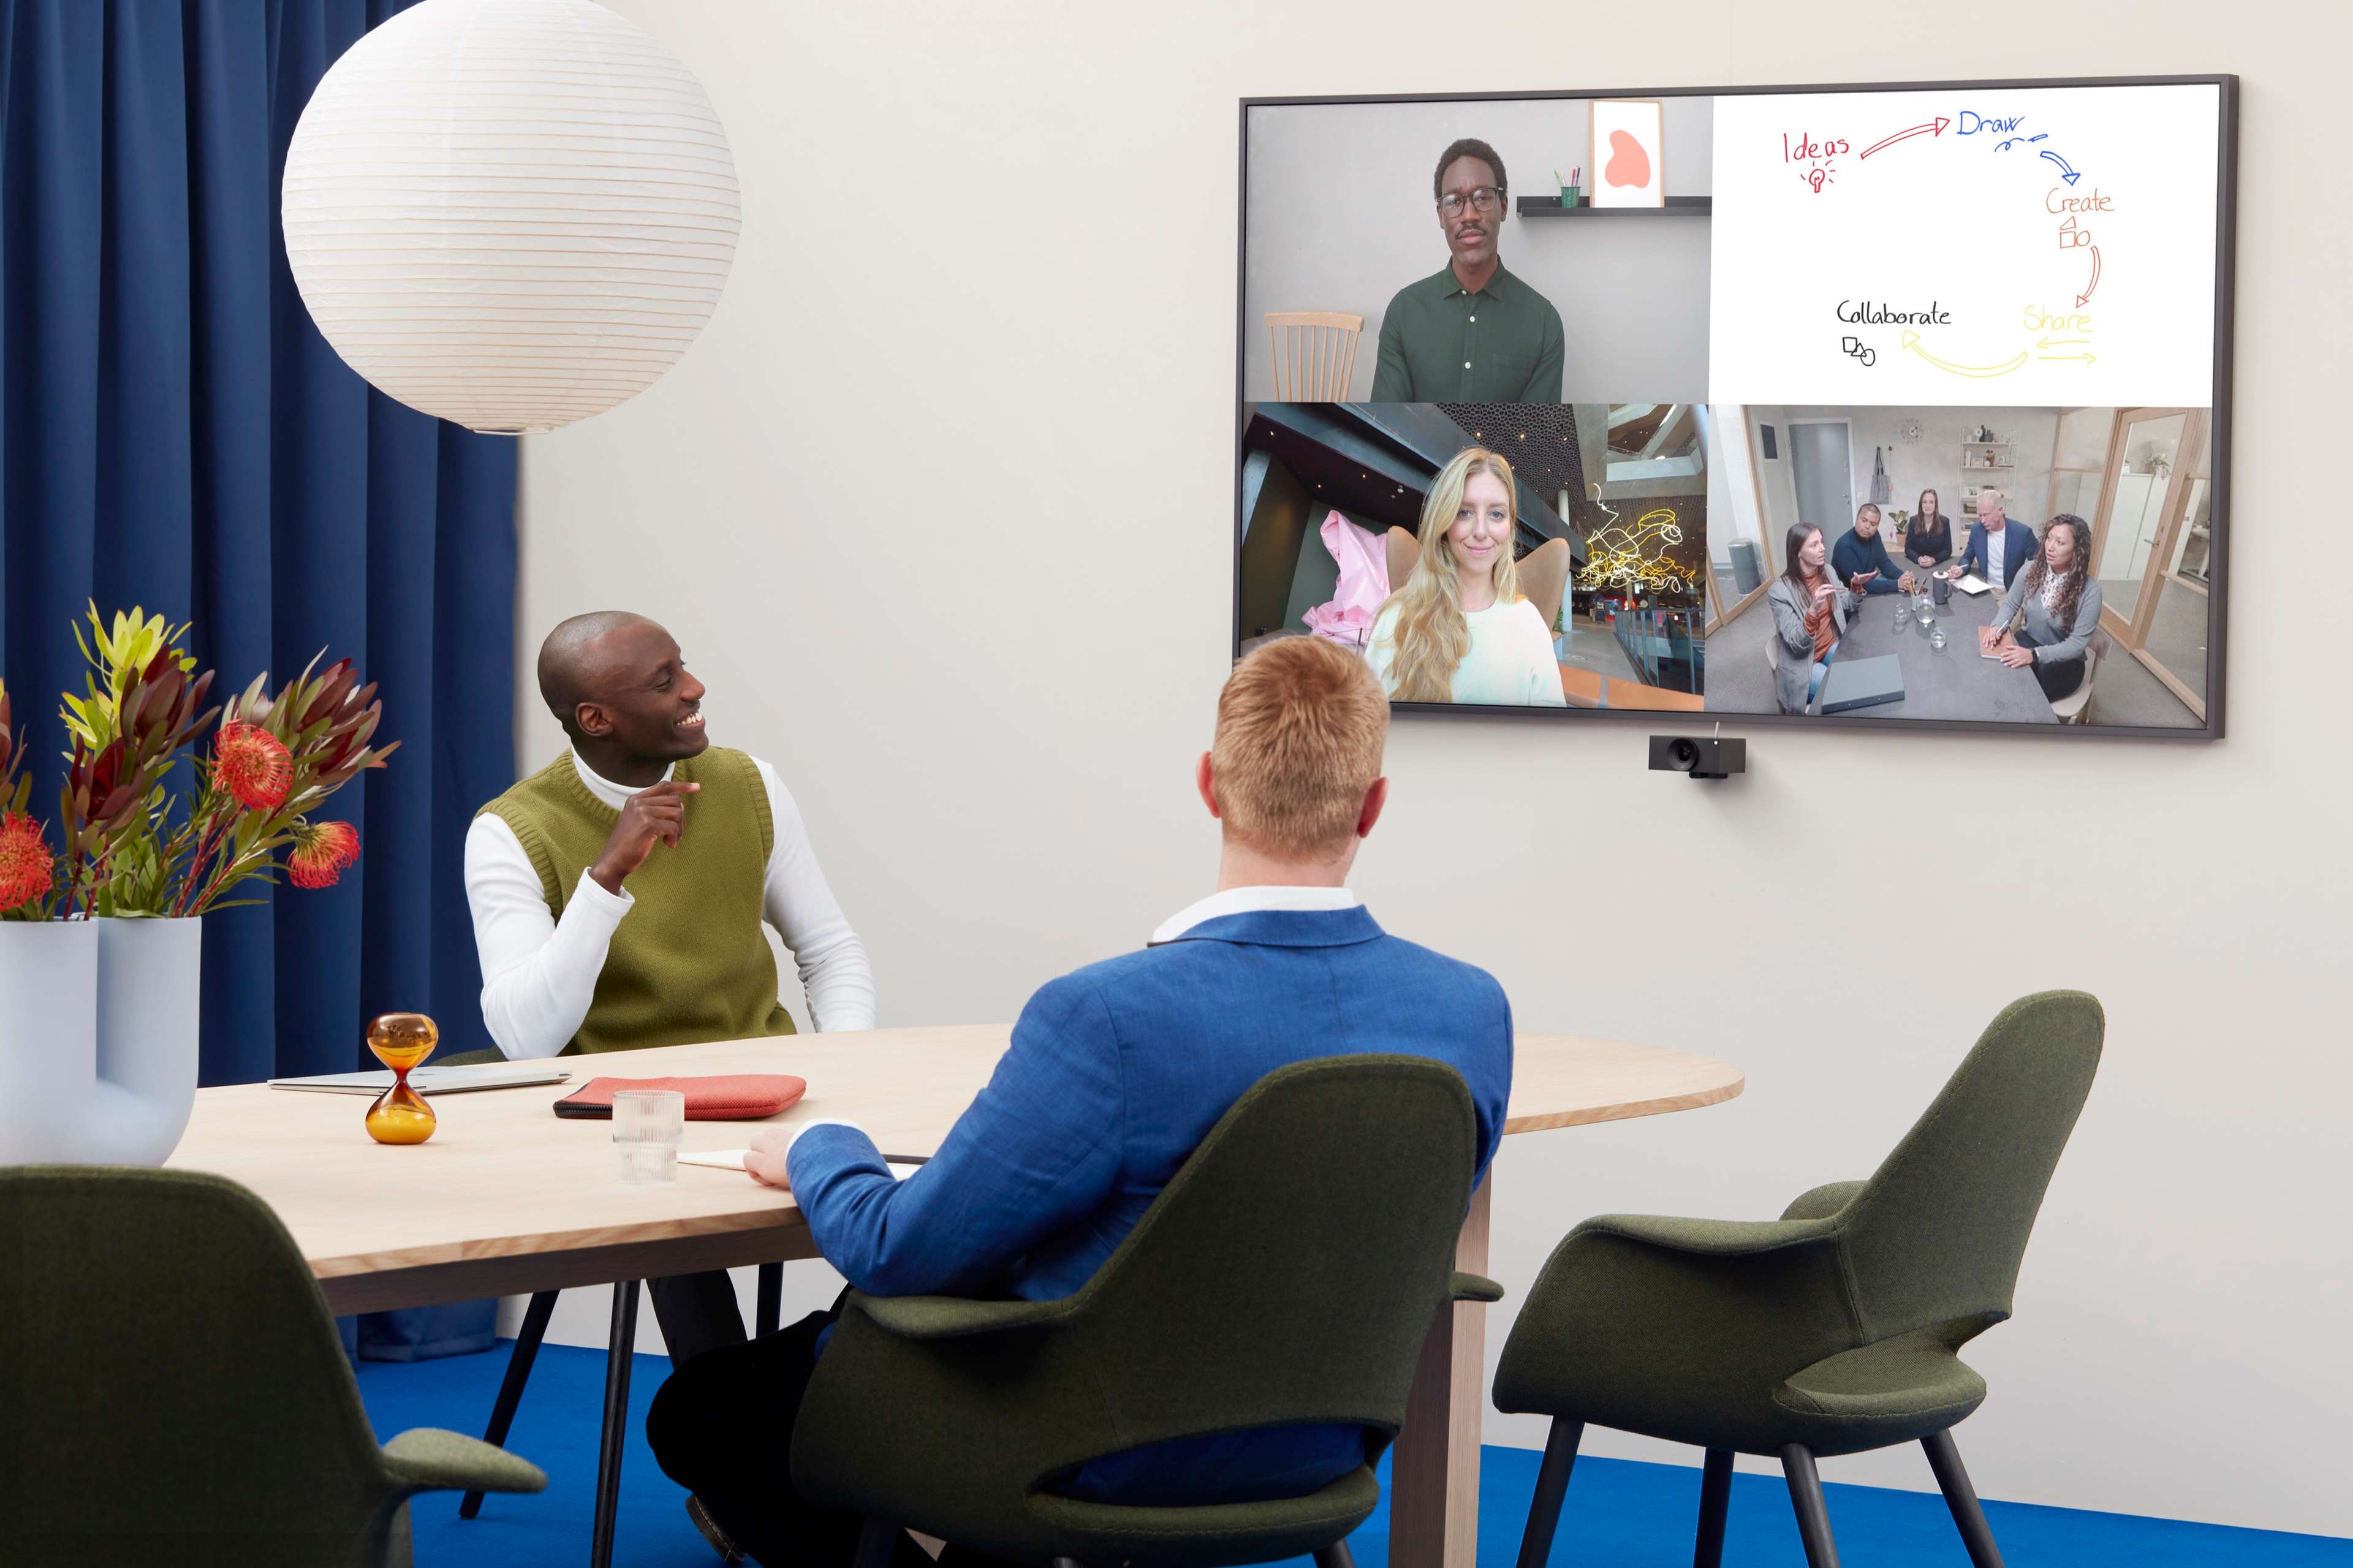 Medium meeting room with two in room participants and remote participants visible on the screen on the wall